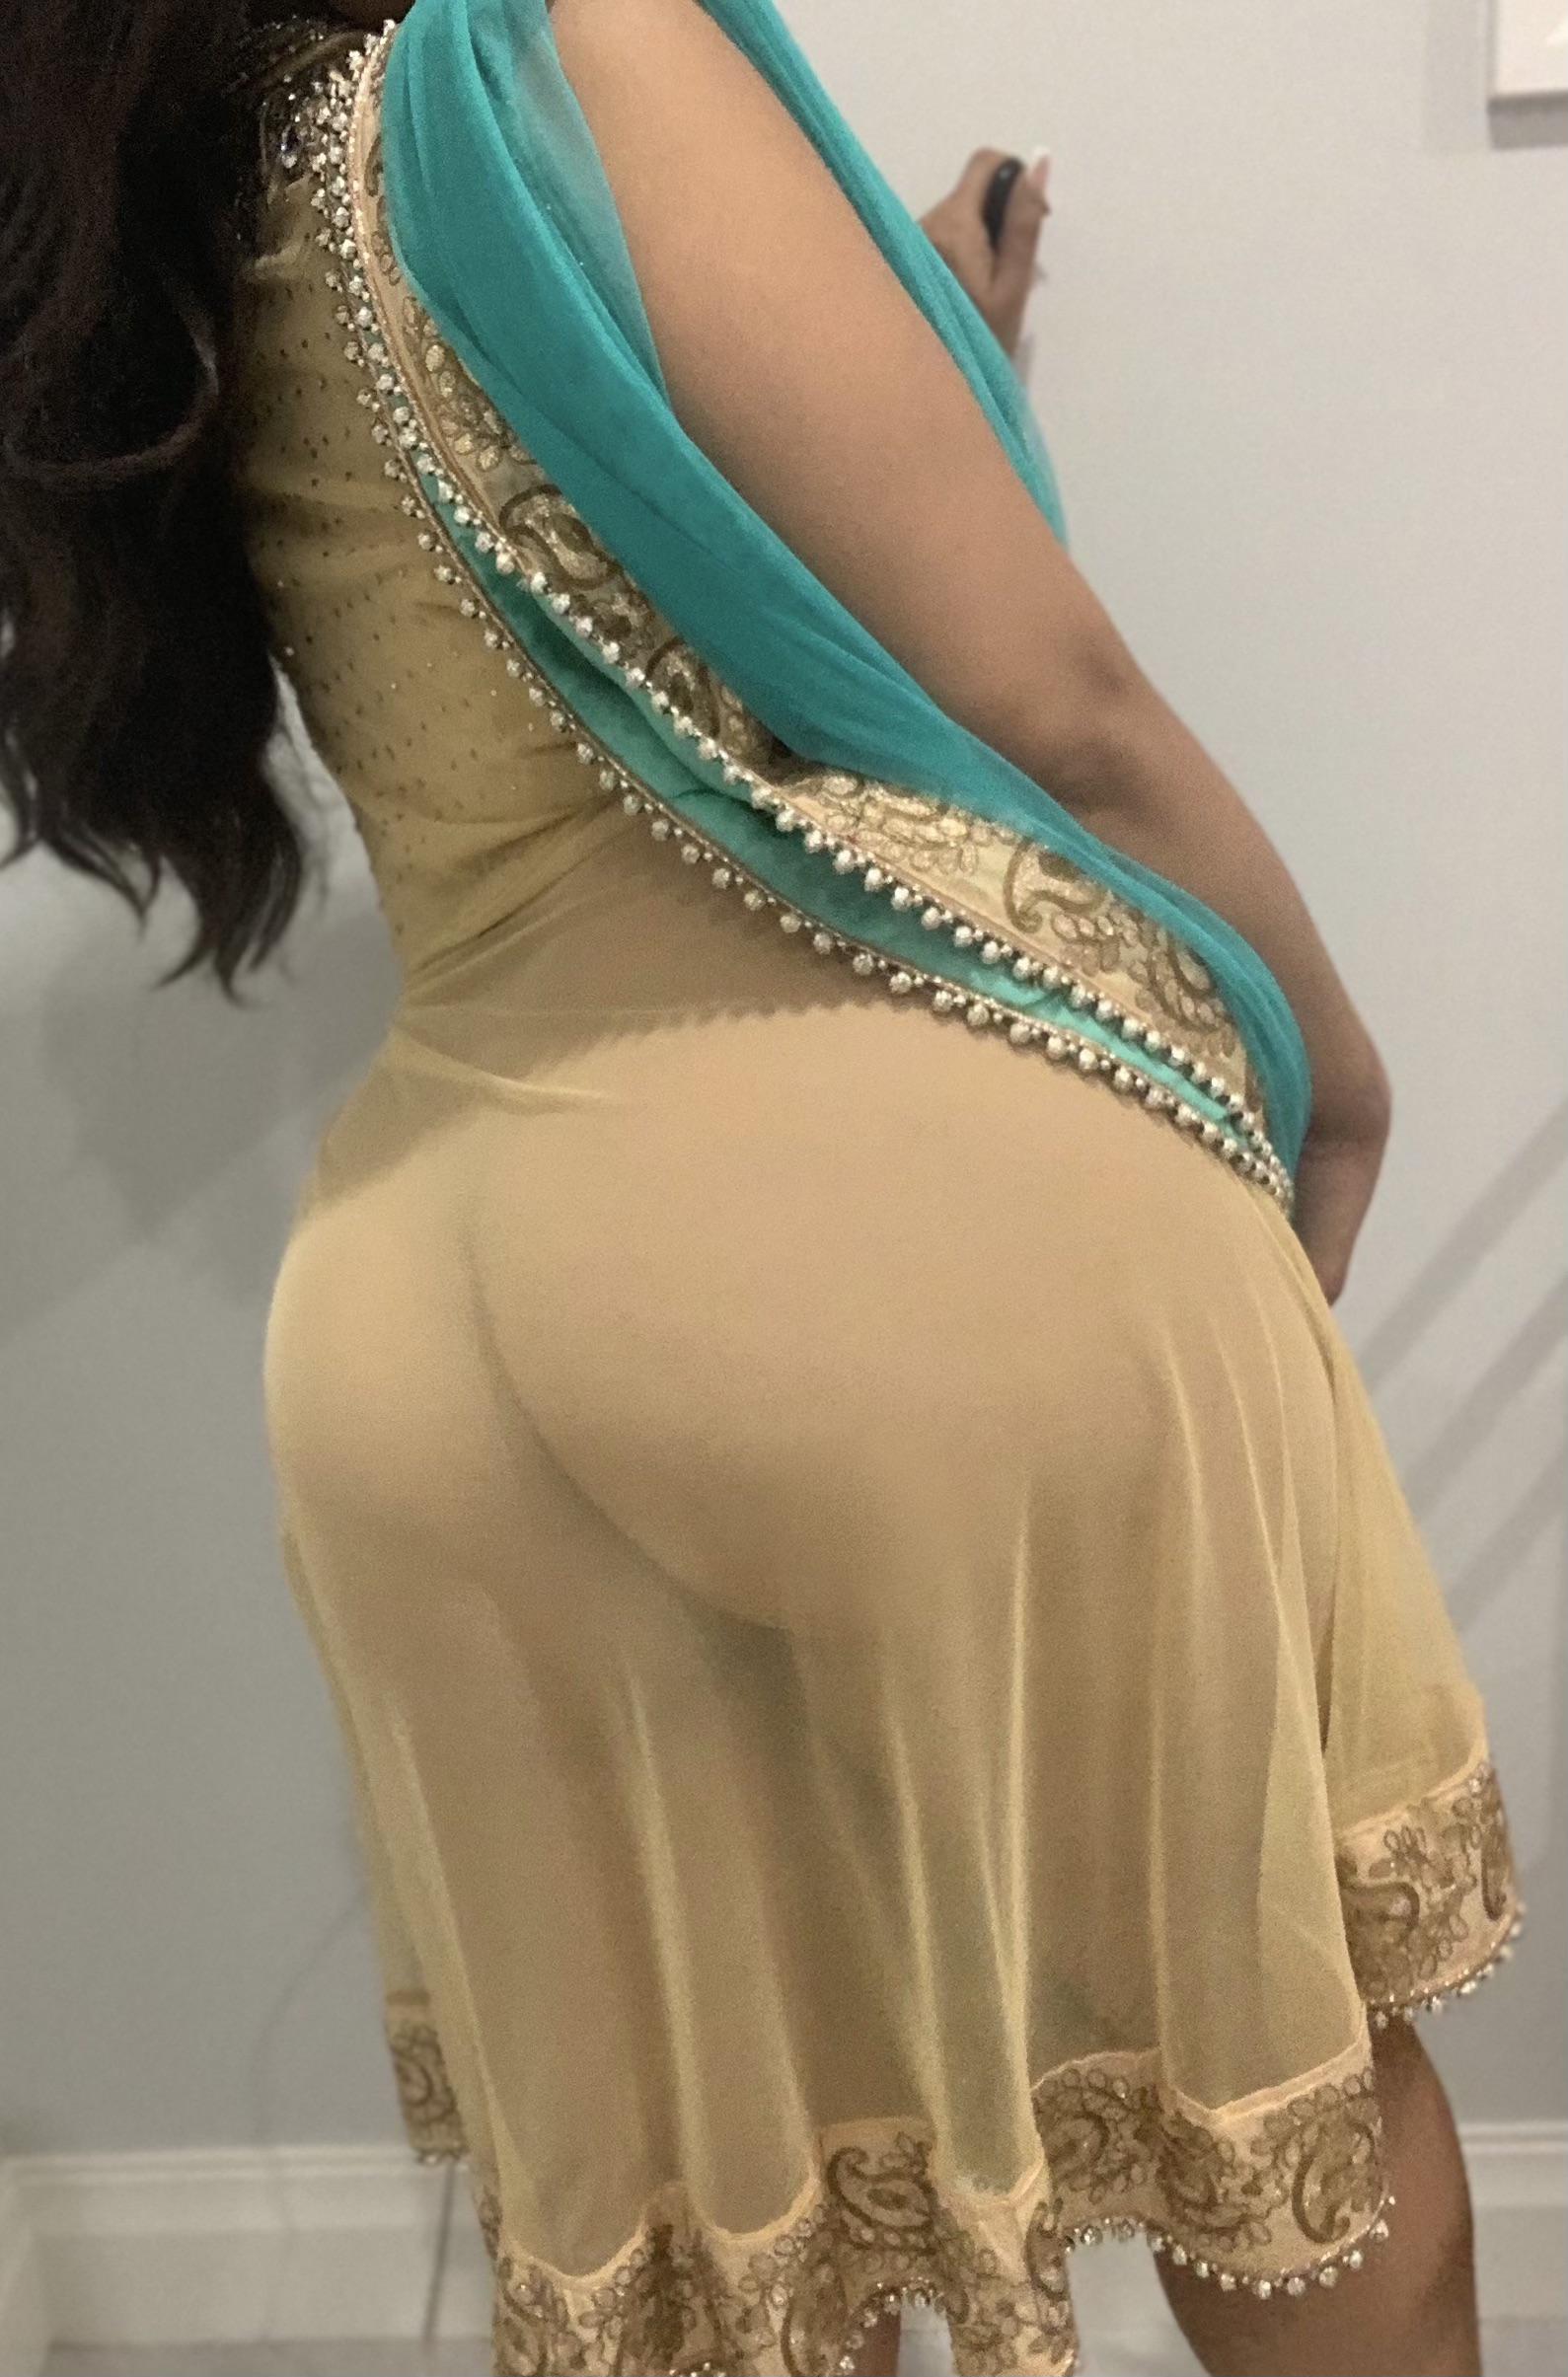 Fuck this big Punjabi ass in the bathroom at the reception while the couple cuts their wedding cake ☺️ [30]